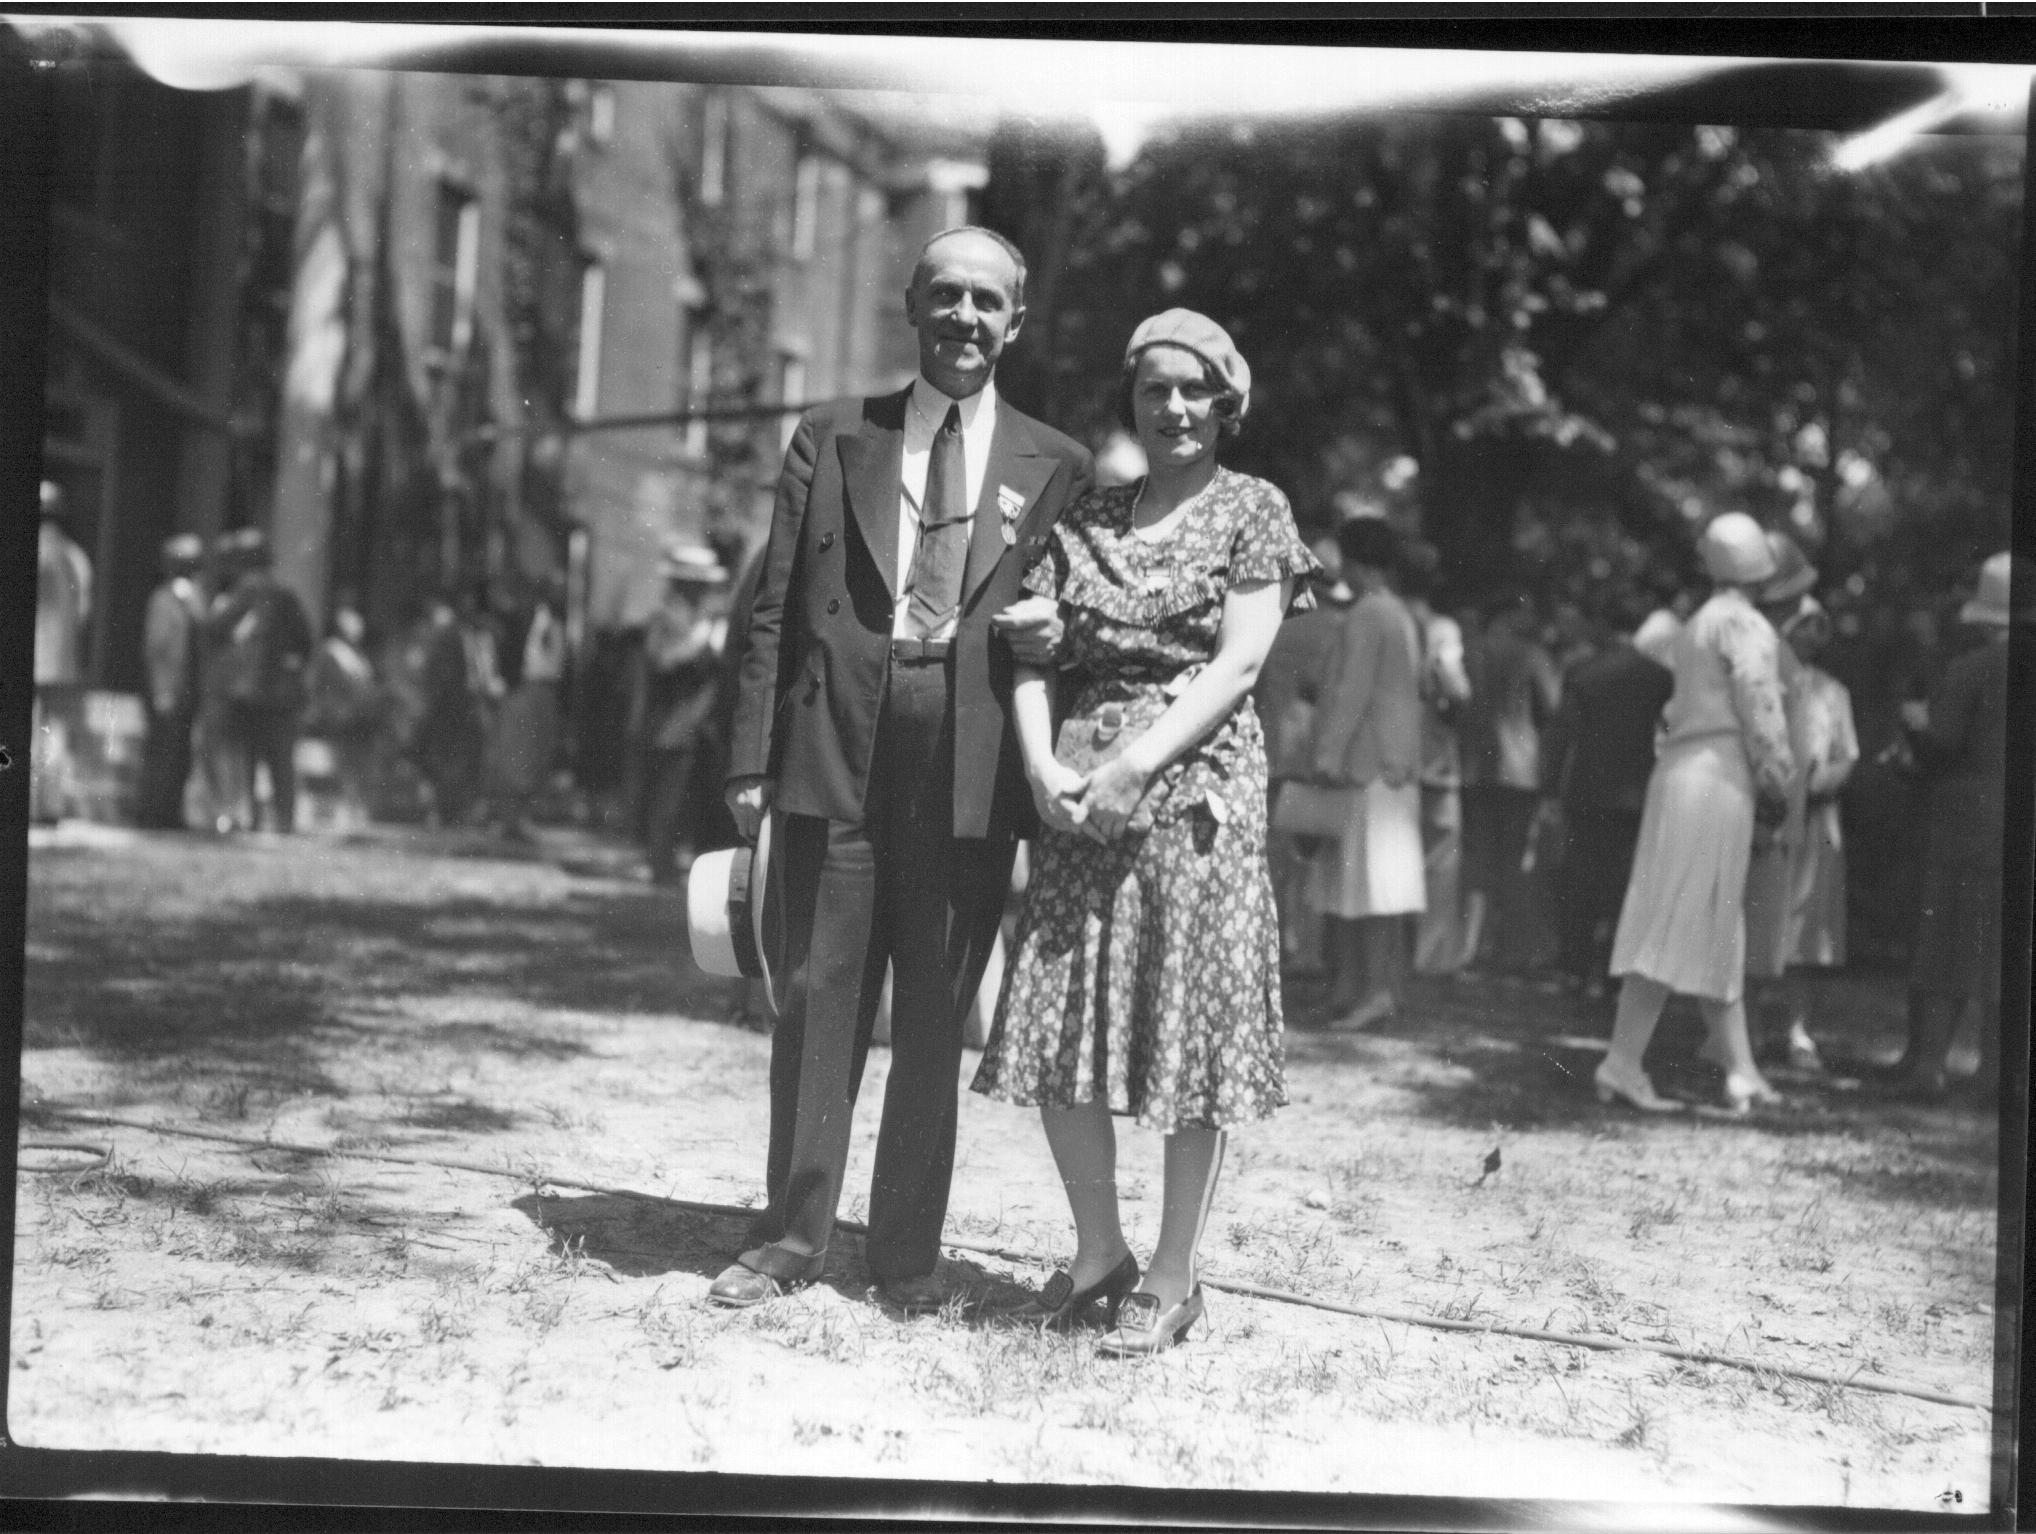 Man and woman at Phi Delta Theta celebration, Oxford College 1931 (3192588730)